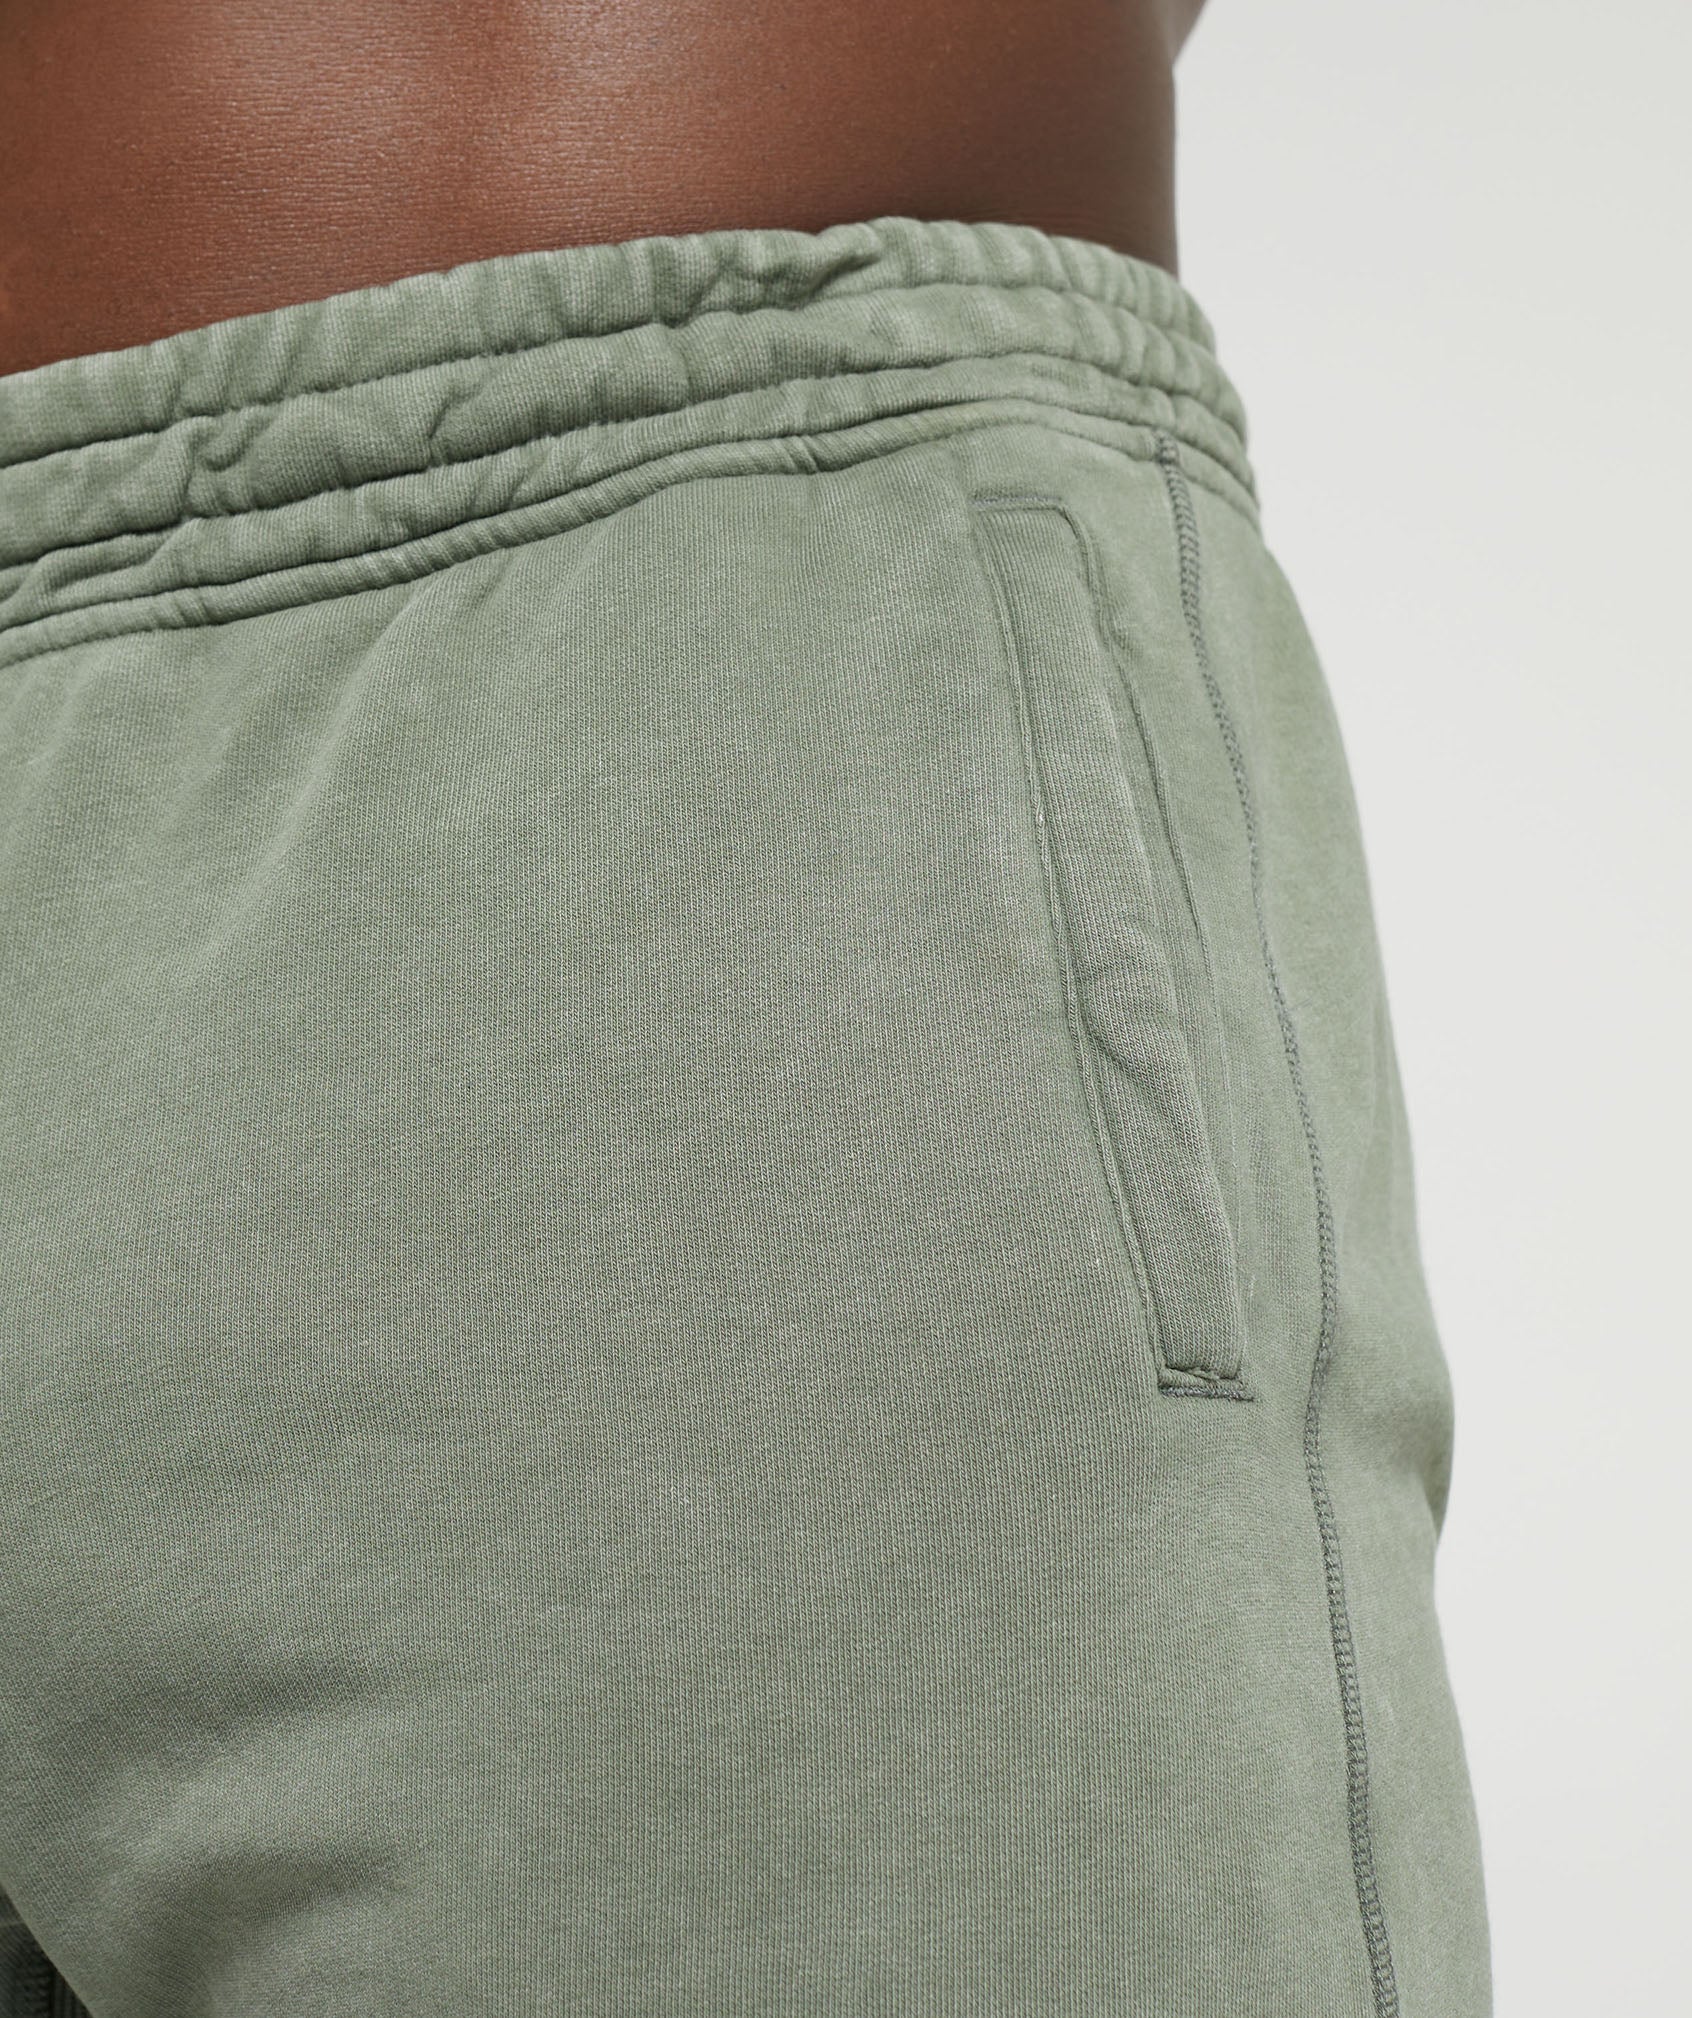 Heritage Joggers in Dusk Green - view 6